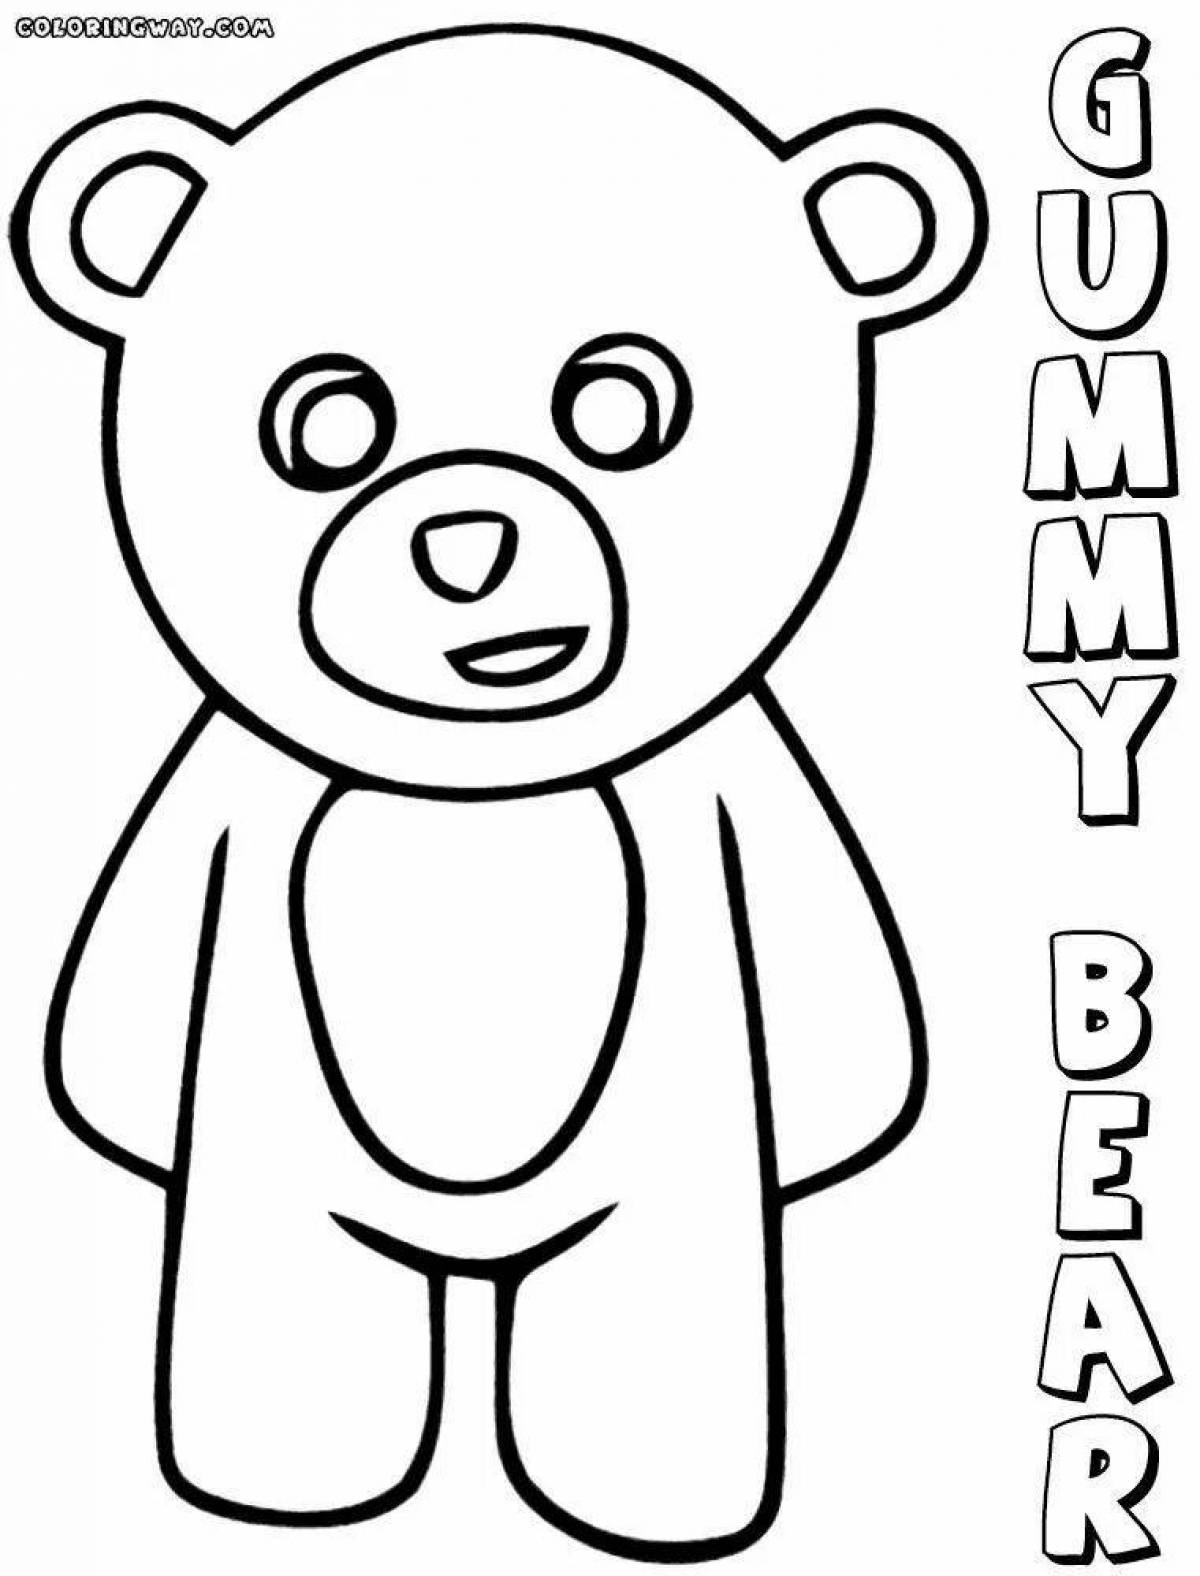 Adorable humber bear coloring page